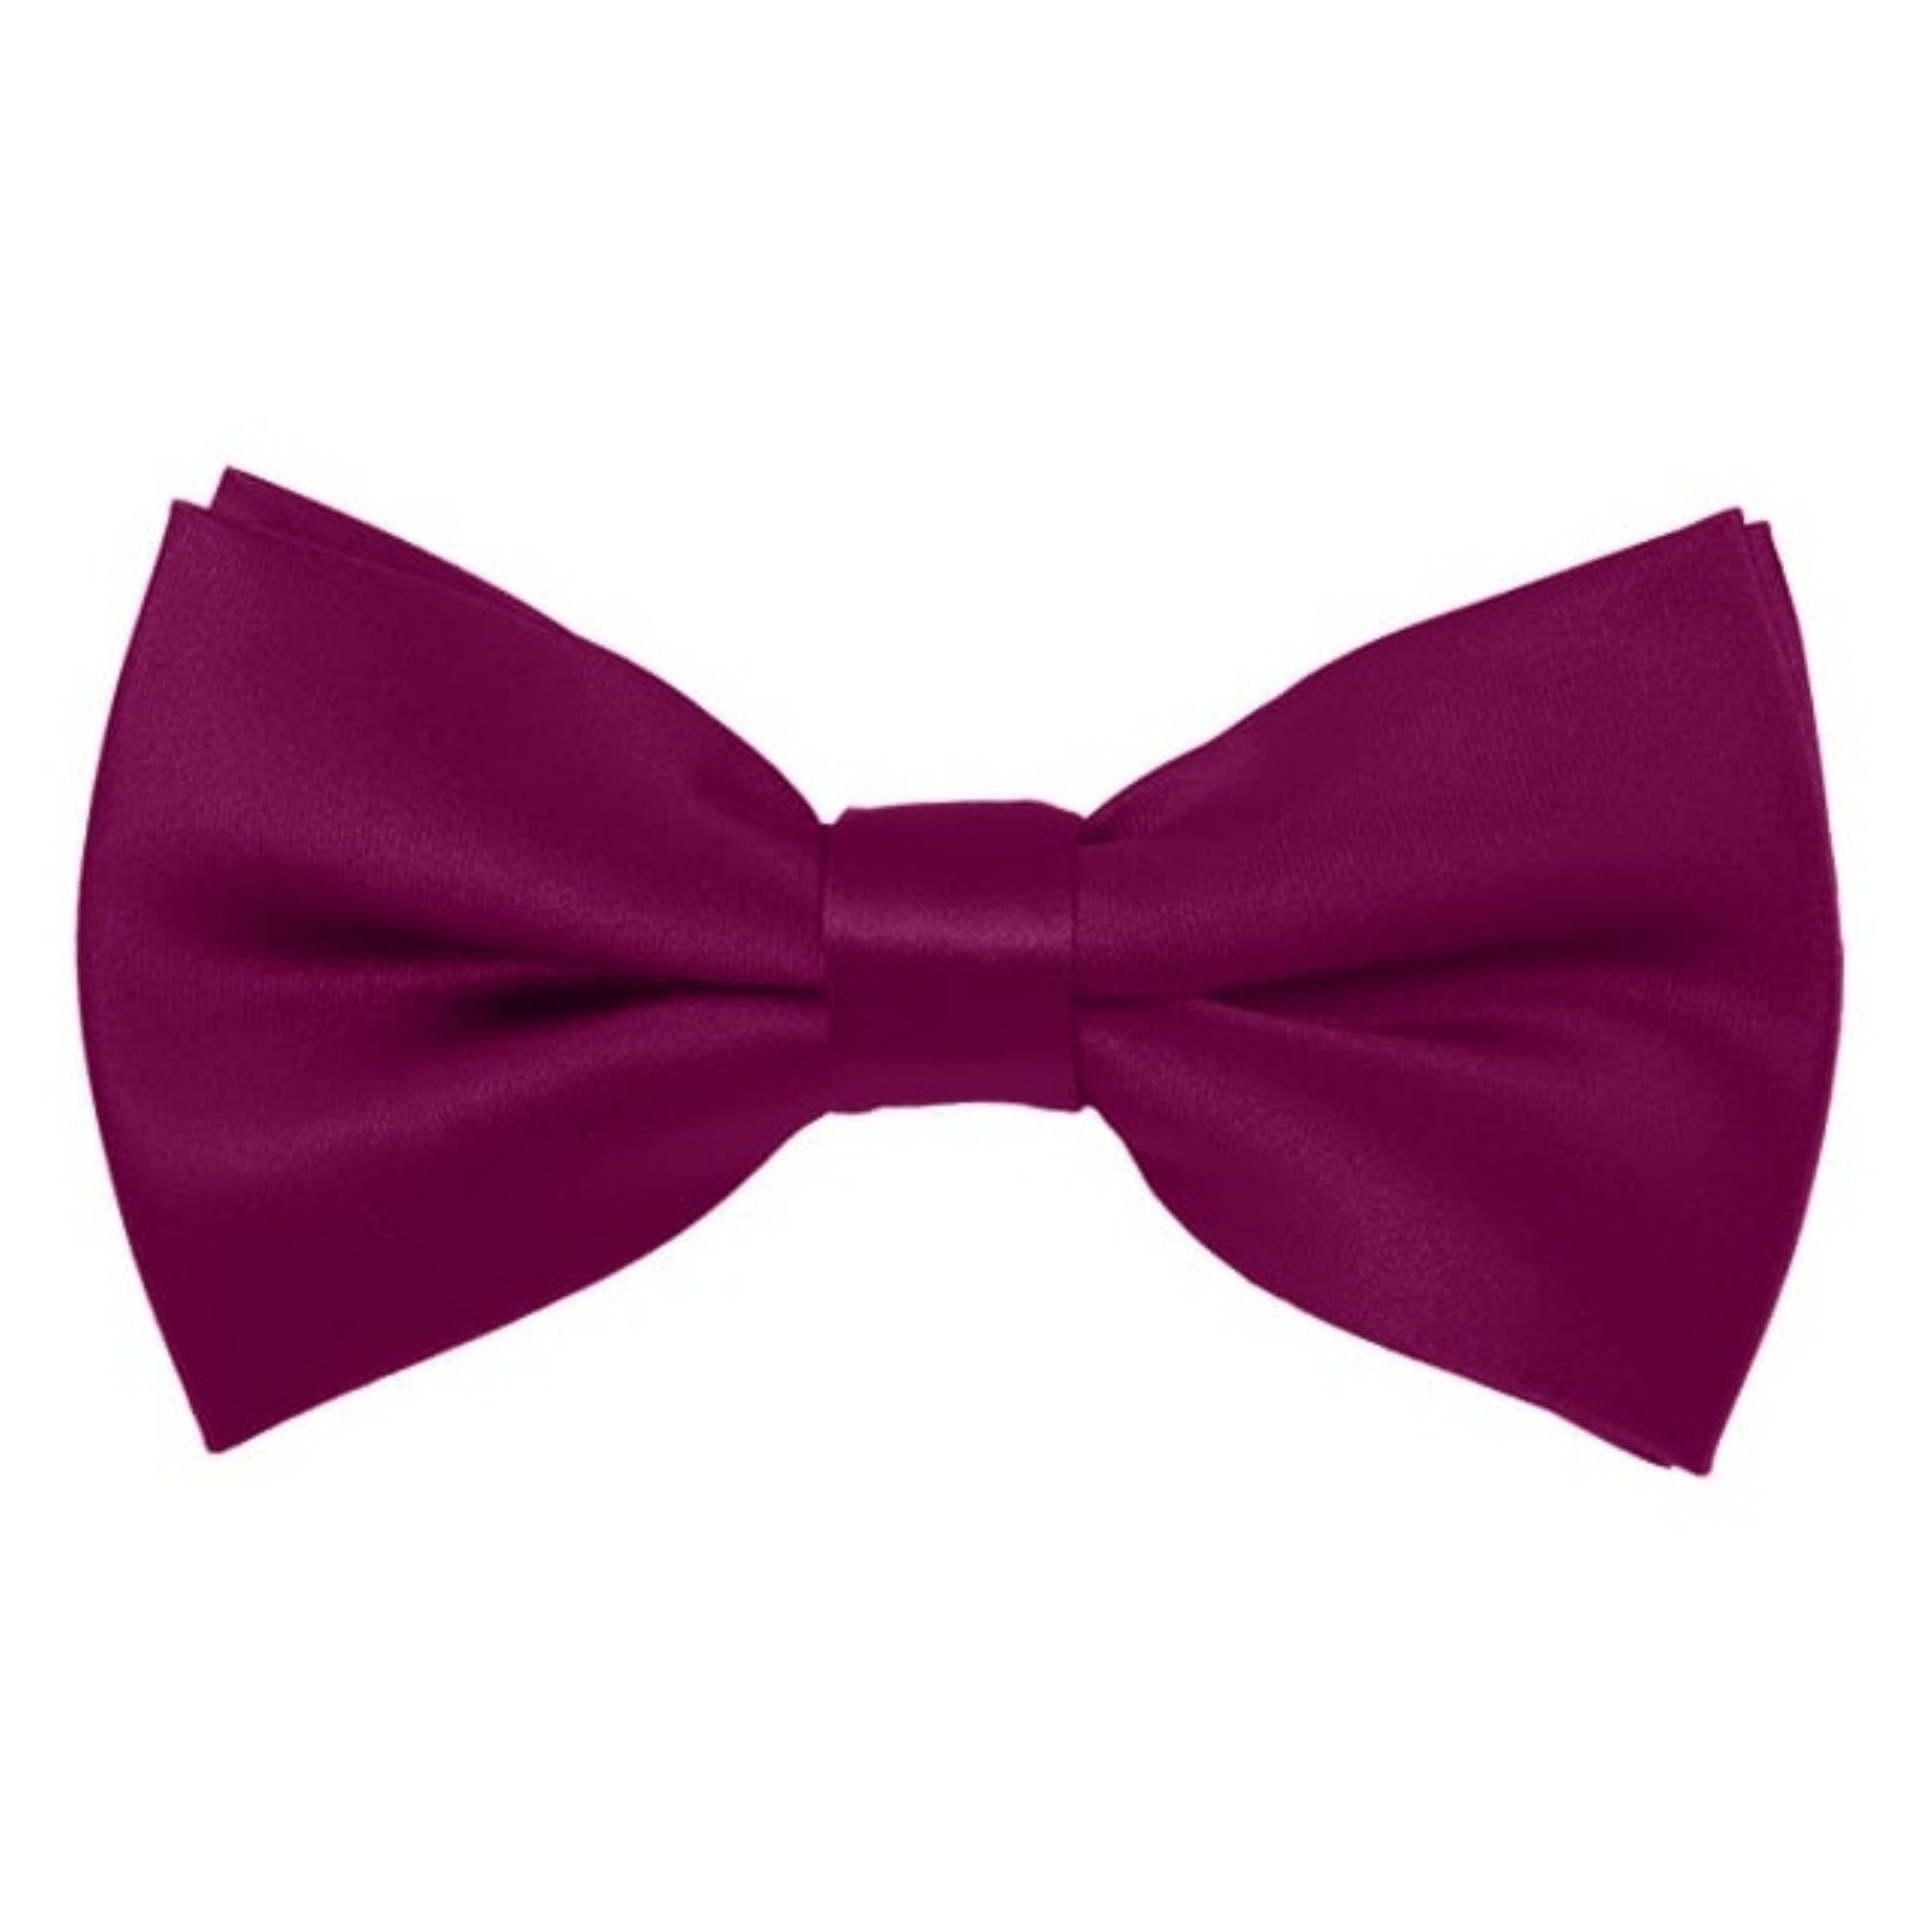 TheDapperTie Men's Solid Color 2.5 W And 4.5 L Inch Pre-Tied adjustable Bow Ties Men's Solid Color Bow Tie TheDapperTie Raspberry  